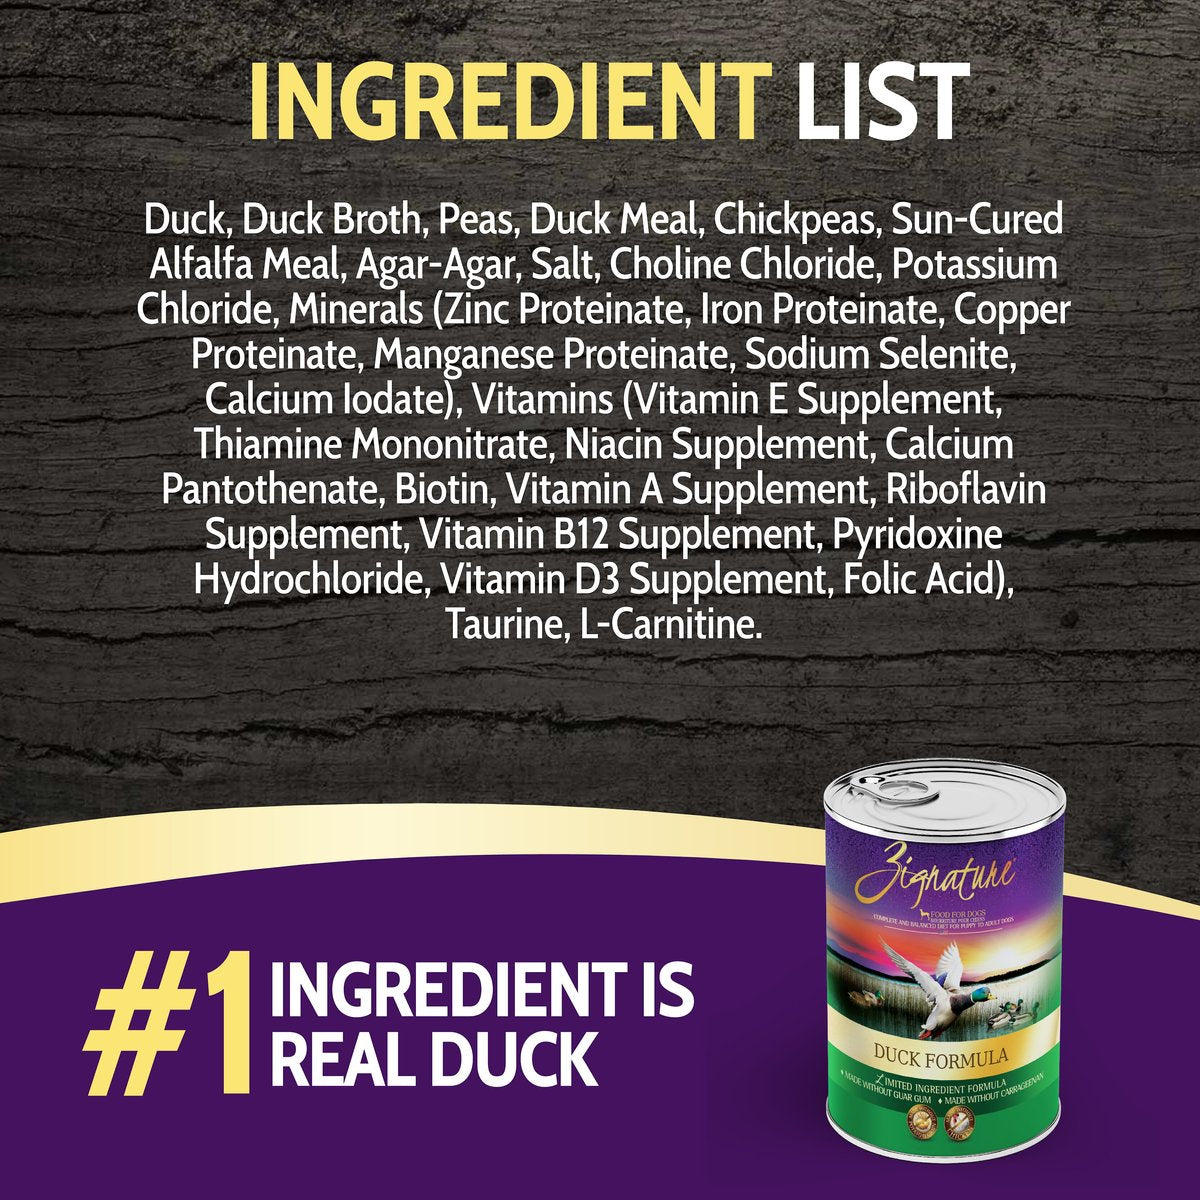 Zignature Duck Limited Ingredient Formula Grain-Free Canned Dog Food  Canned Dog Food  | PetMax Canada